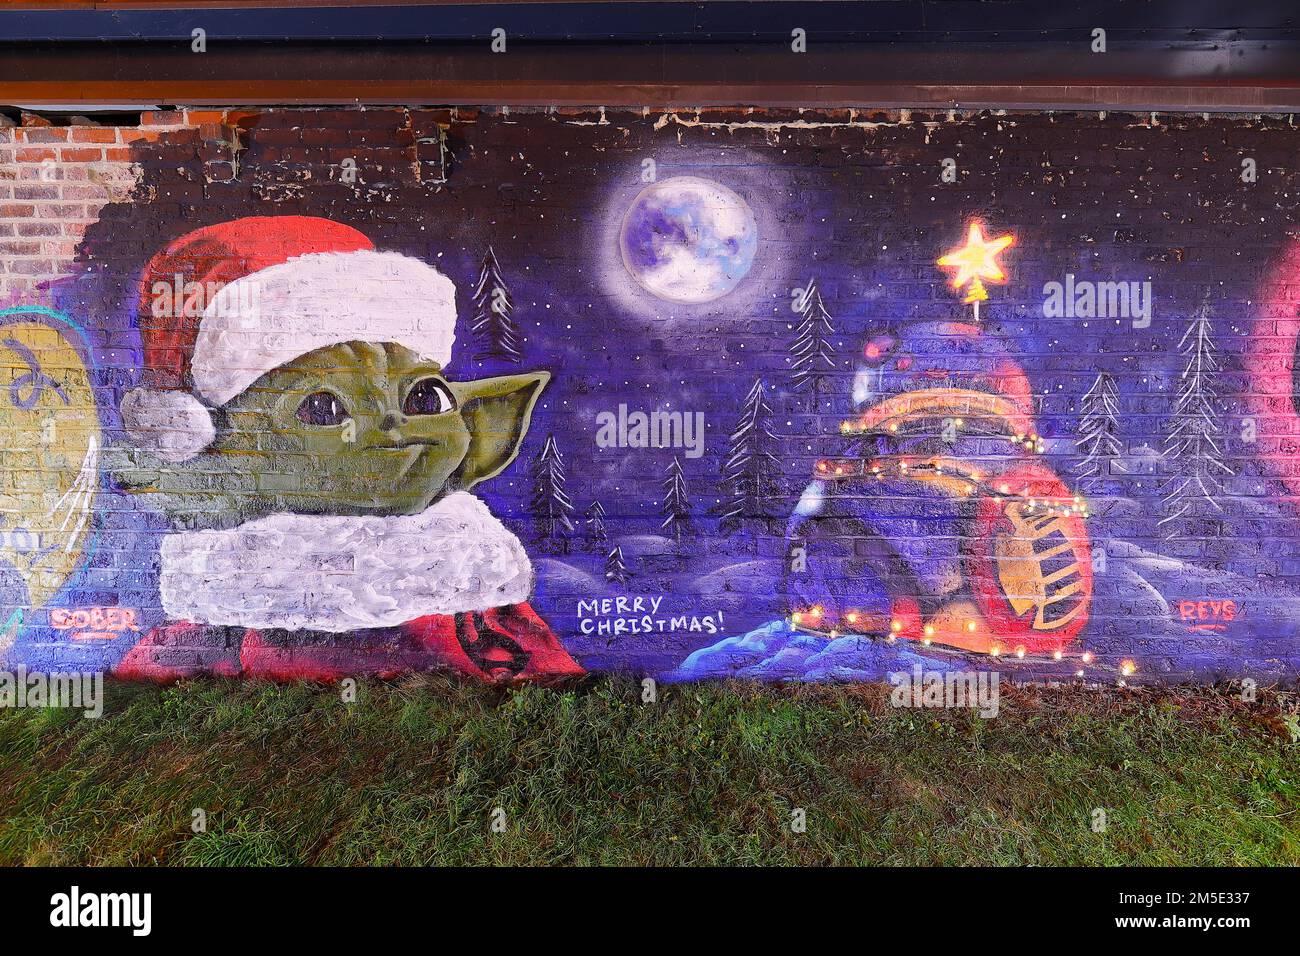 Star Wars mural featuring Yoda in Santa Hat & BB8 with Christmas lights has been created on a wall in Leeds by artists Laffiti & Northern Mural Co Stock Photo